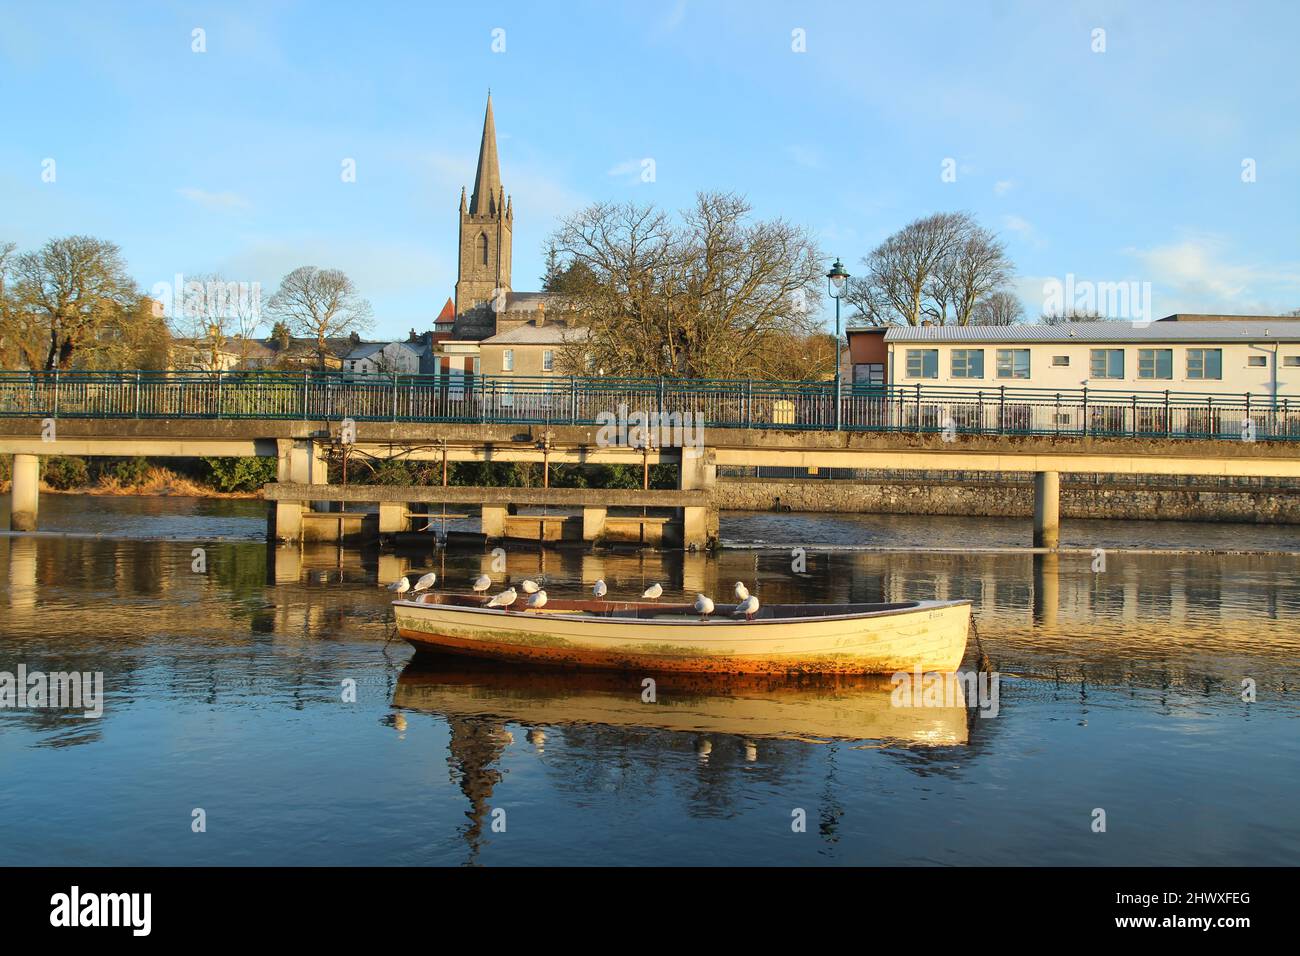 Sligo, Ireland in spring featuring small rowboat in still waters of Garavogue river Stock Photo